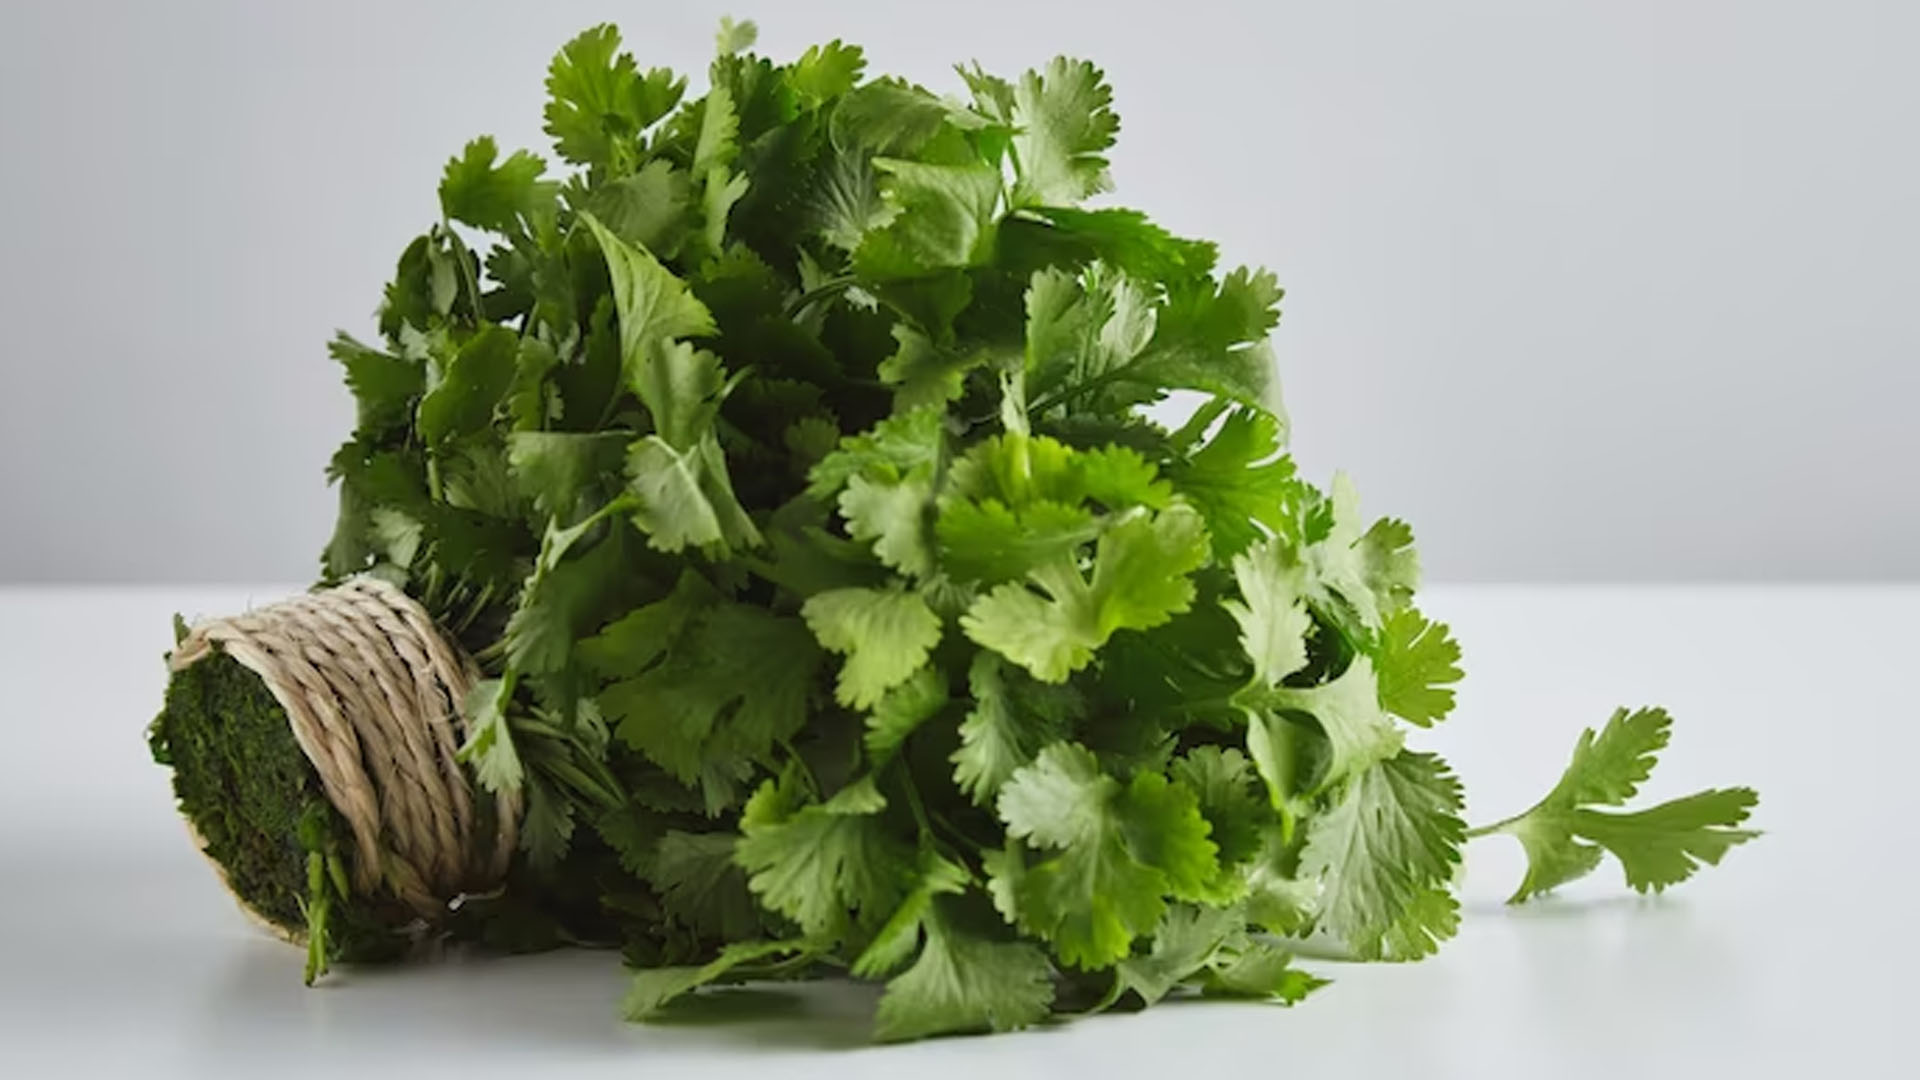 What Are Some Health Benefits Of Cilantro?